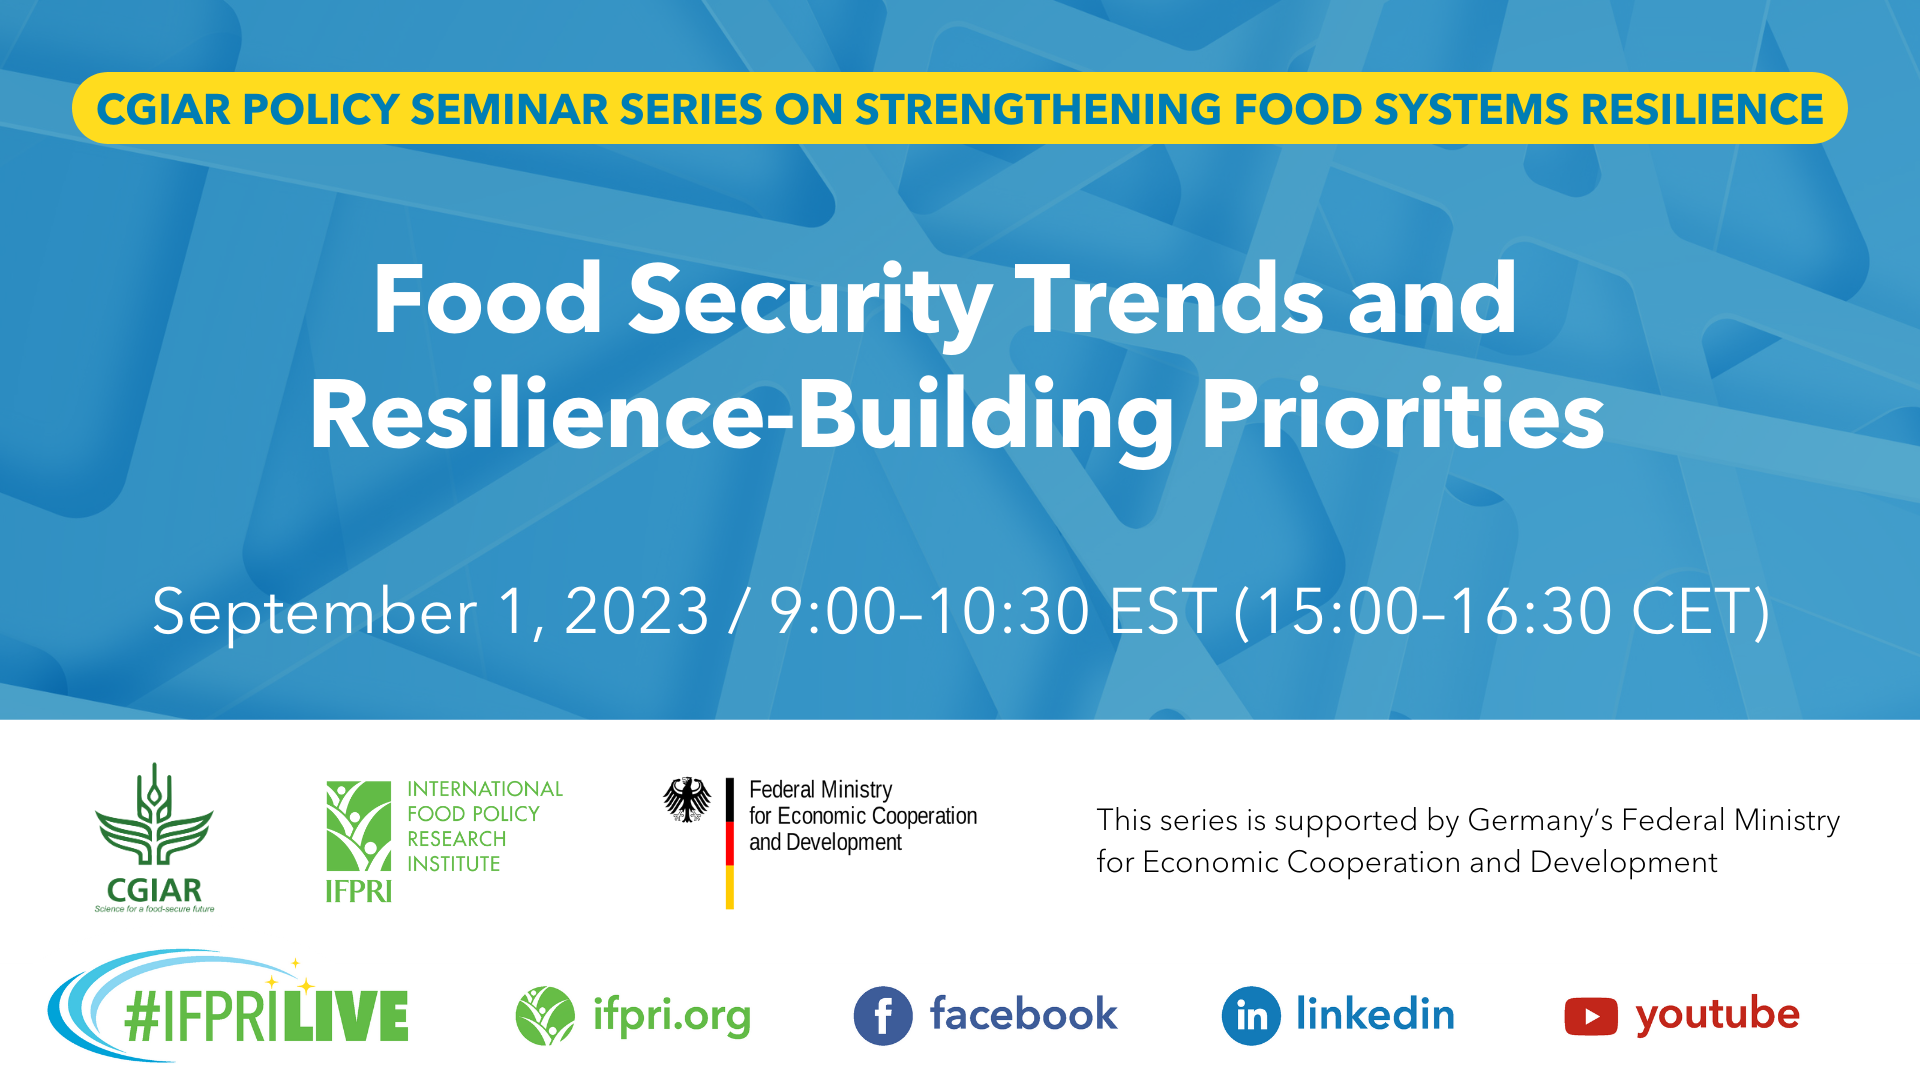 Food Security Trends and Resilience-Building Priorities